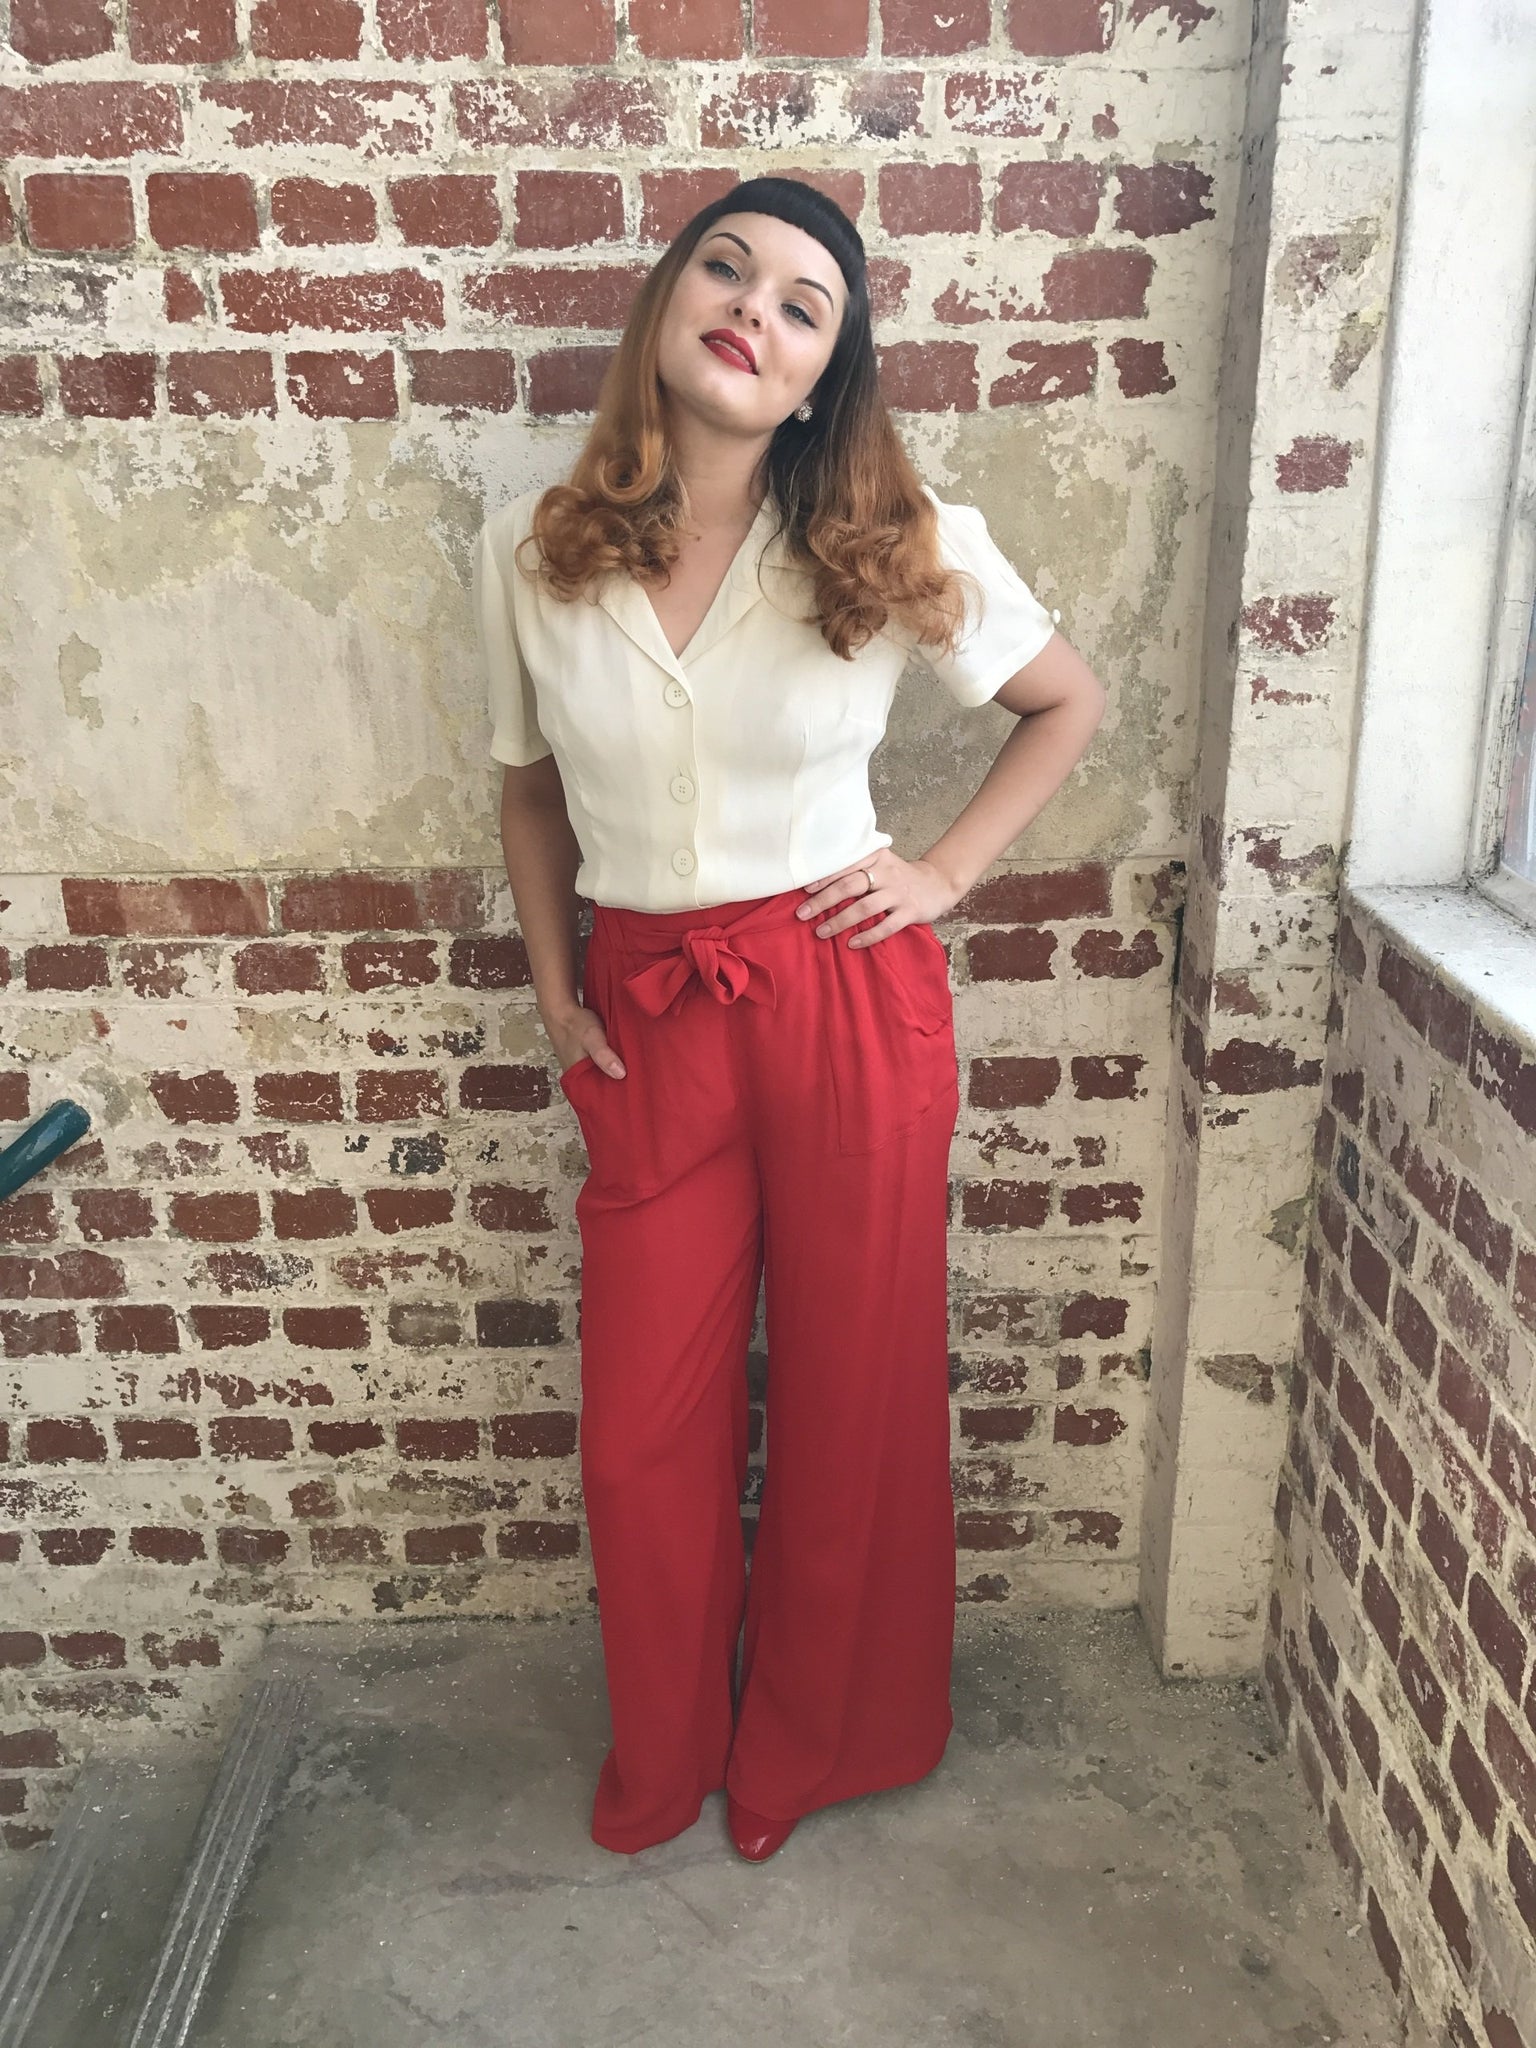 "Winnie" Wide Leg Loose Fit Trousers in 40's Red, Classic 1940s Vintage Inspired Style - True and authentic vintage style clothing, inspired by the Classic styles of CC41 , WW2 and the fun 1950s RocknRoll era, for everyday wear plus events like Goodwood Revival, Twinwood Festival and Viva Las Vegas Rockabilly Weekend Rock n Romance The Seamstress Of Bloomsbury